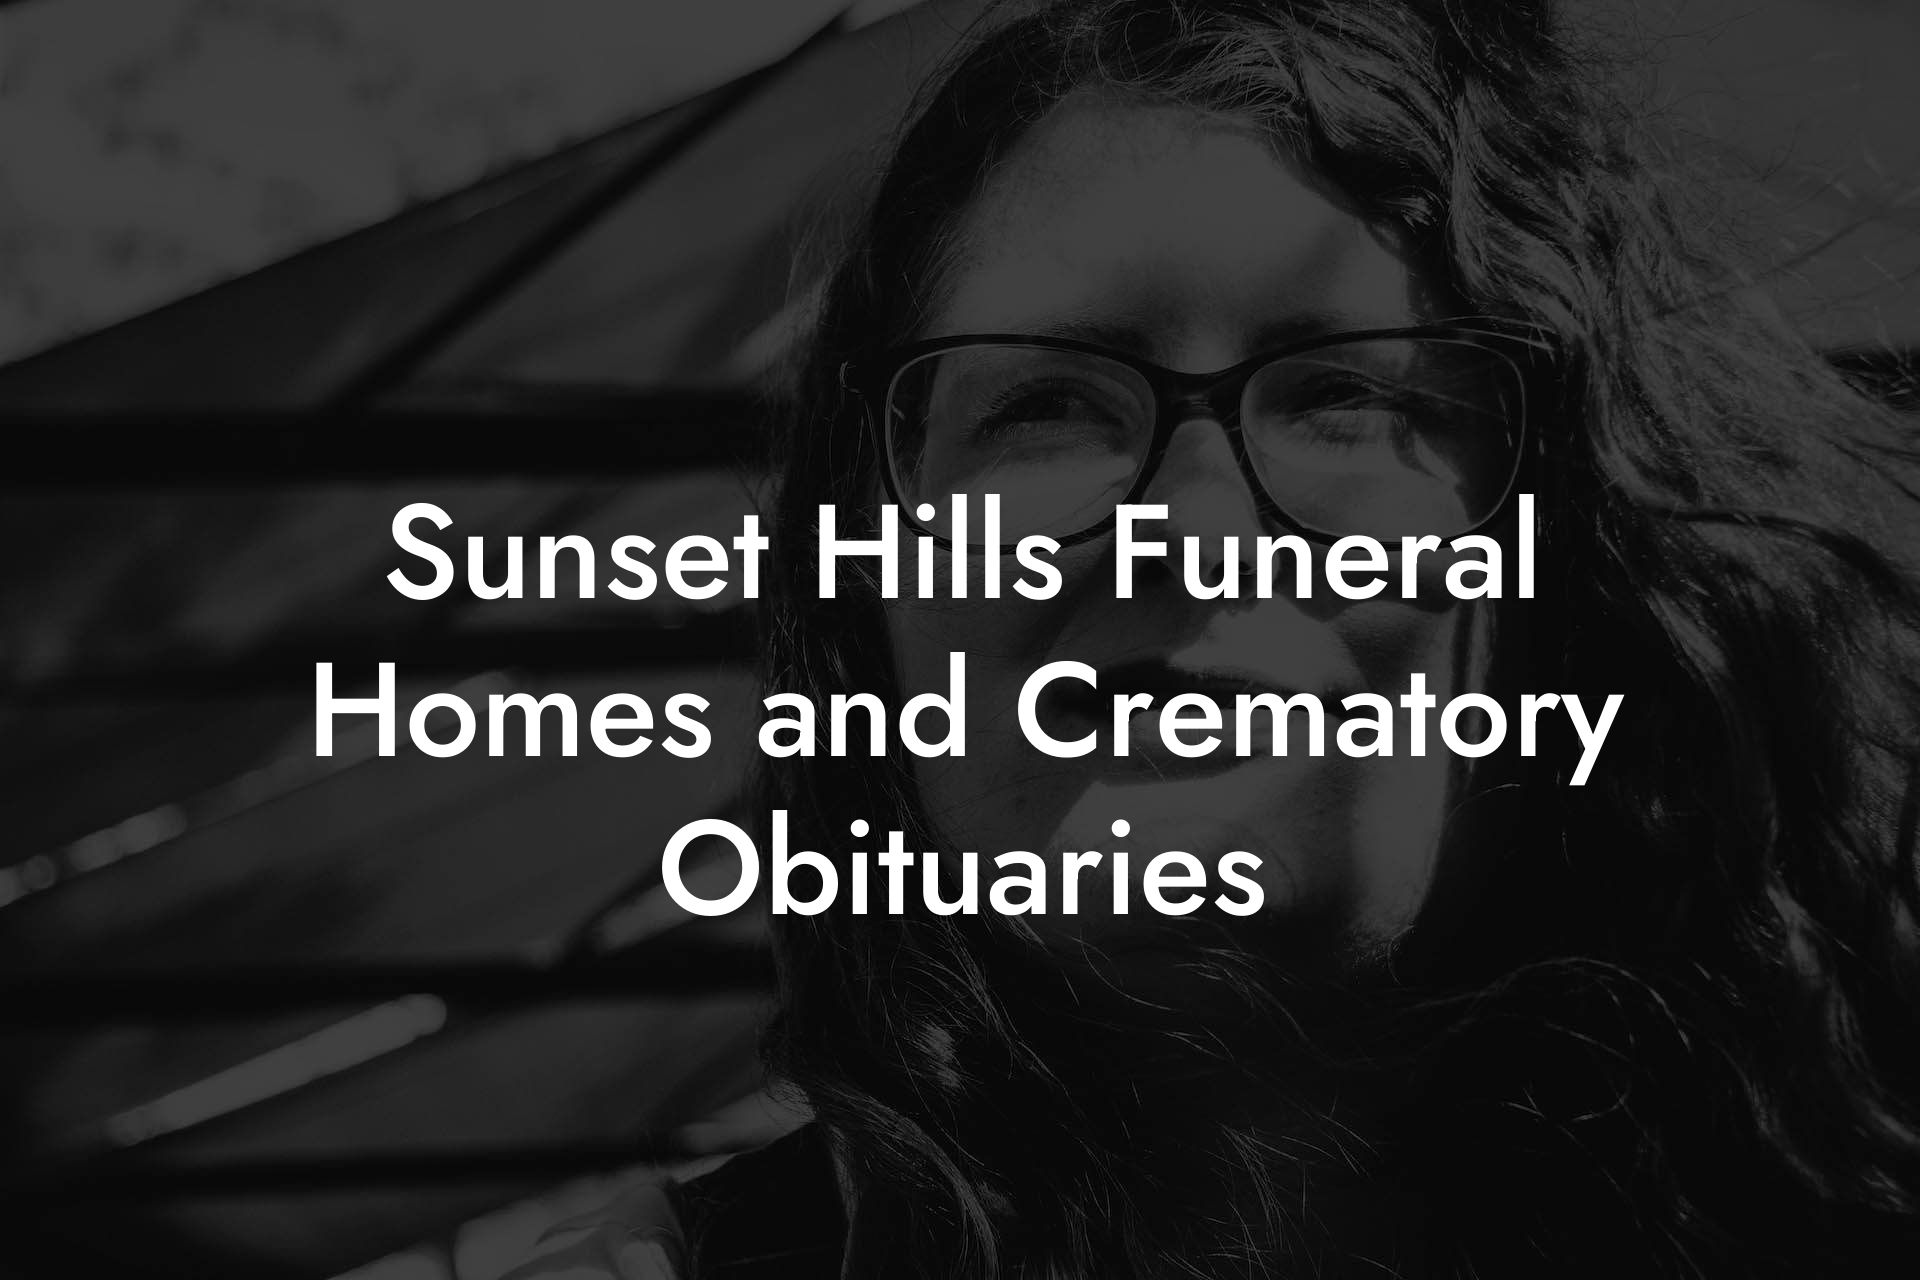 Sunset Hills Funeral Homes and Crematory Obituaries